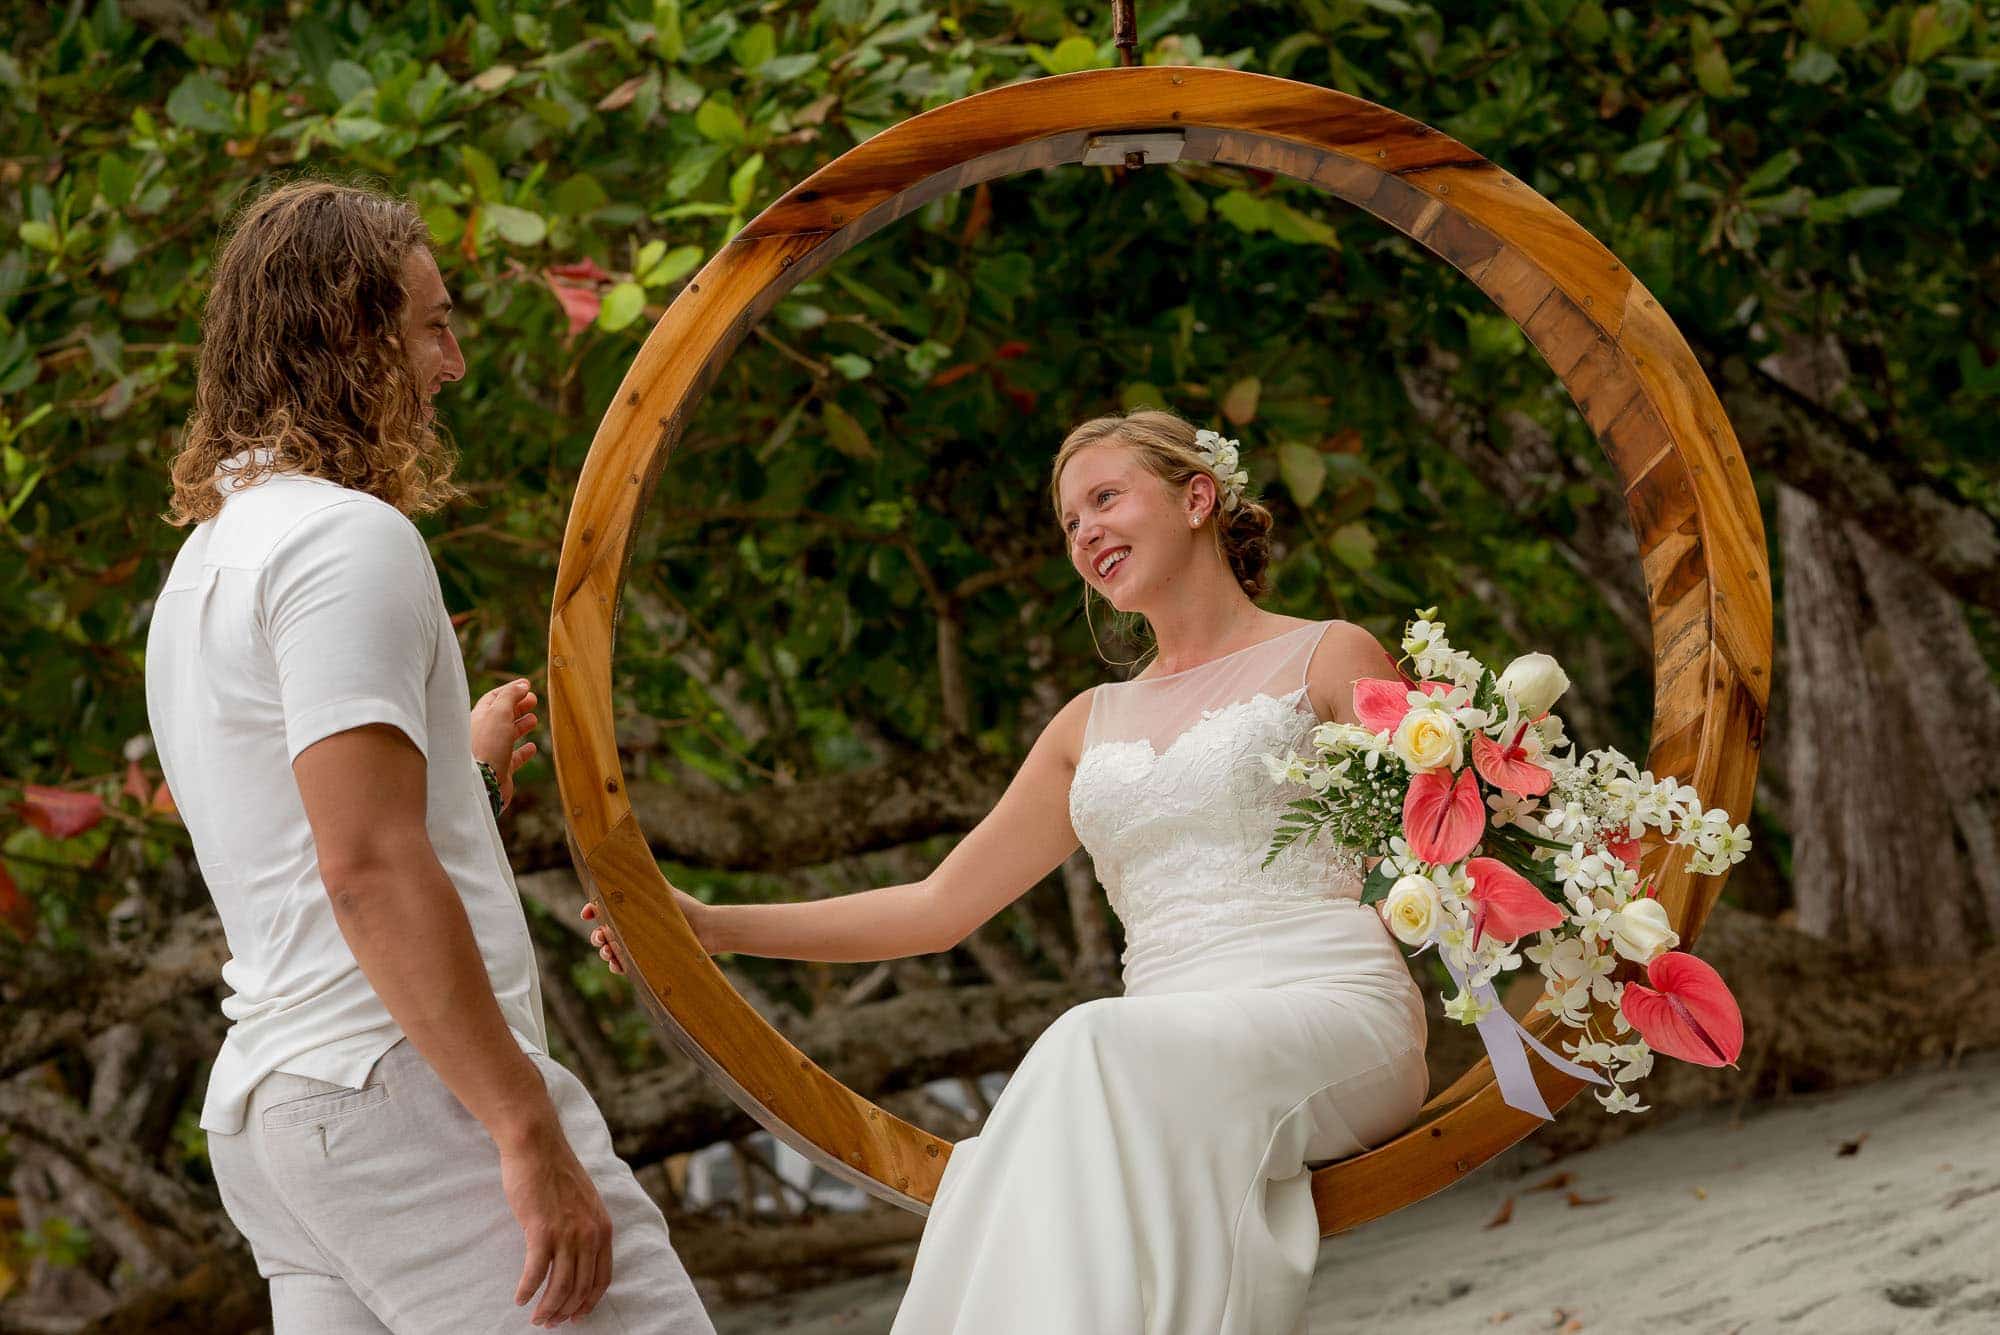 Bride seated in a circle swing with groom at her side